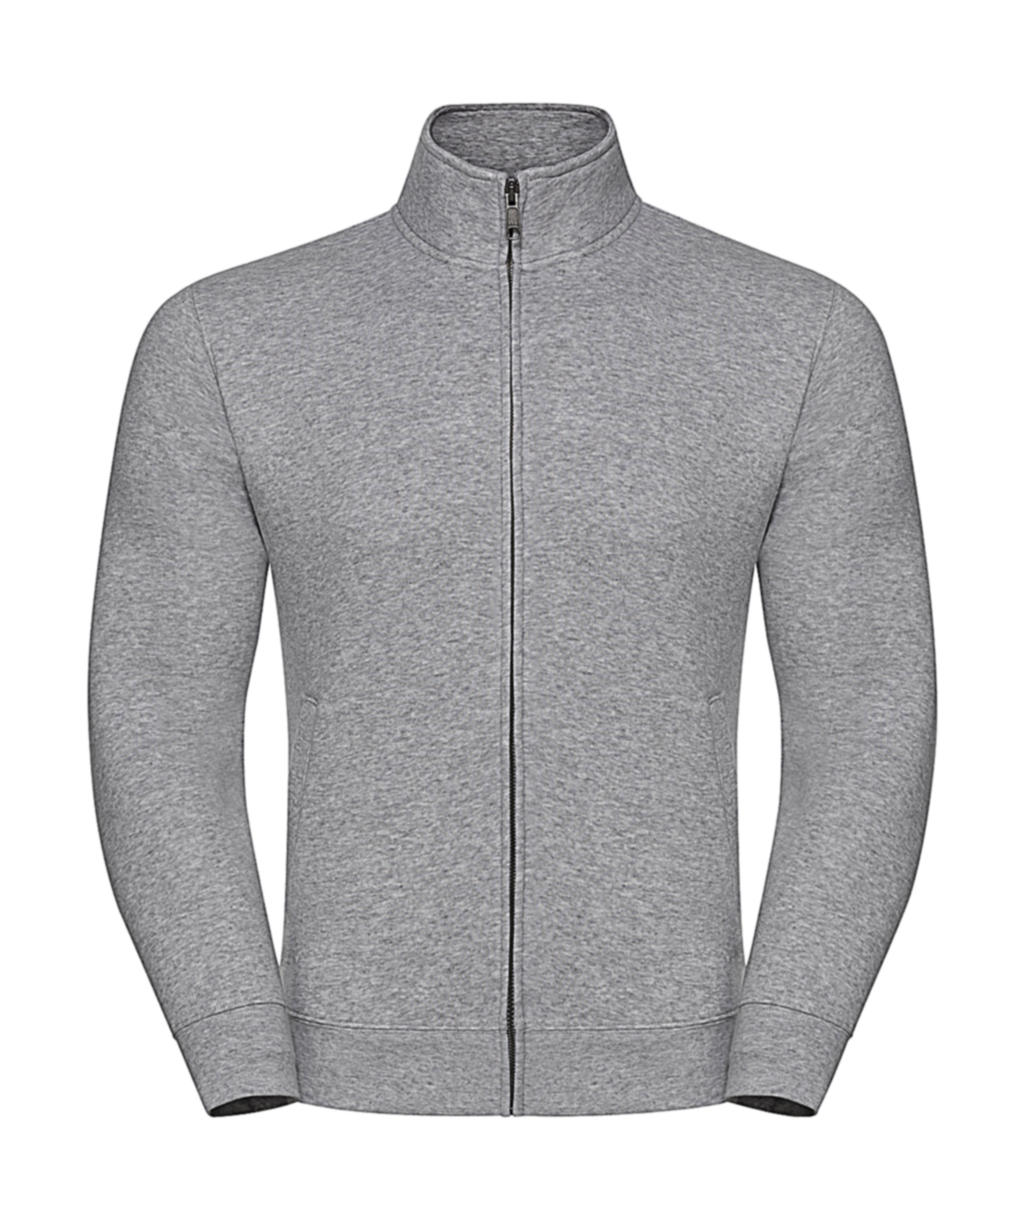  Mens Authentic Sweat Jacket in Farbe Light Oxford